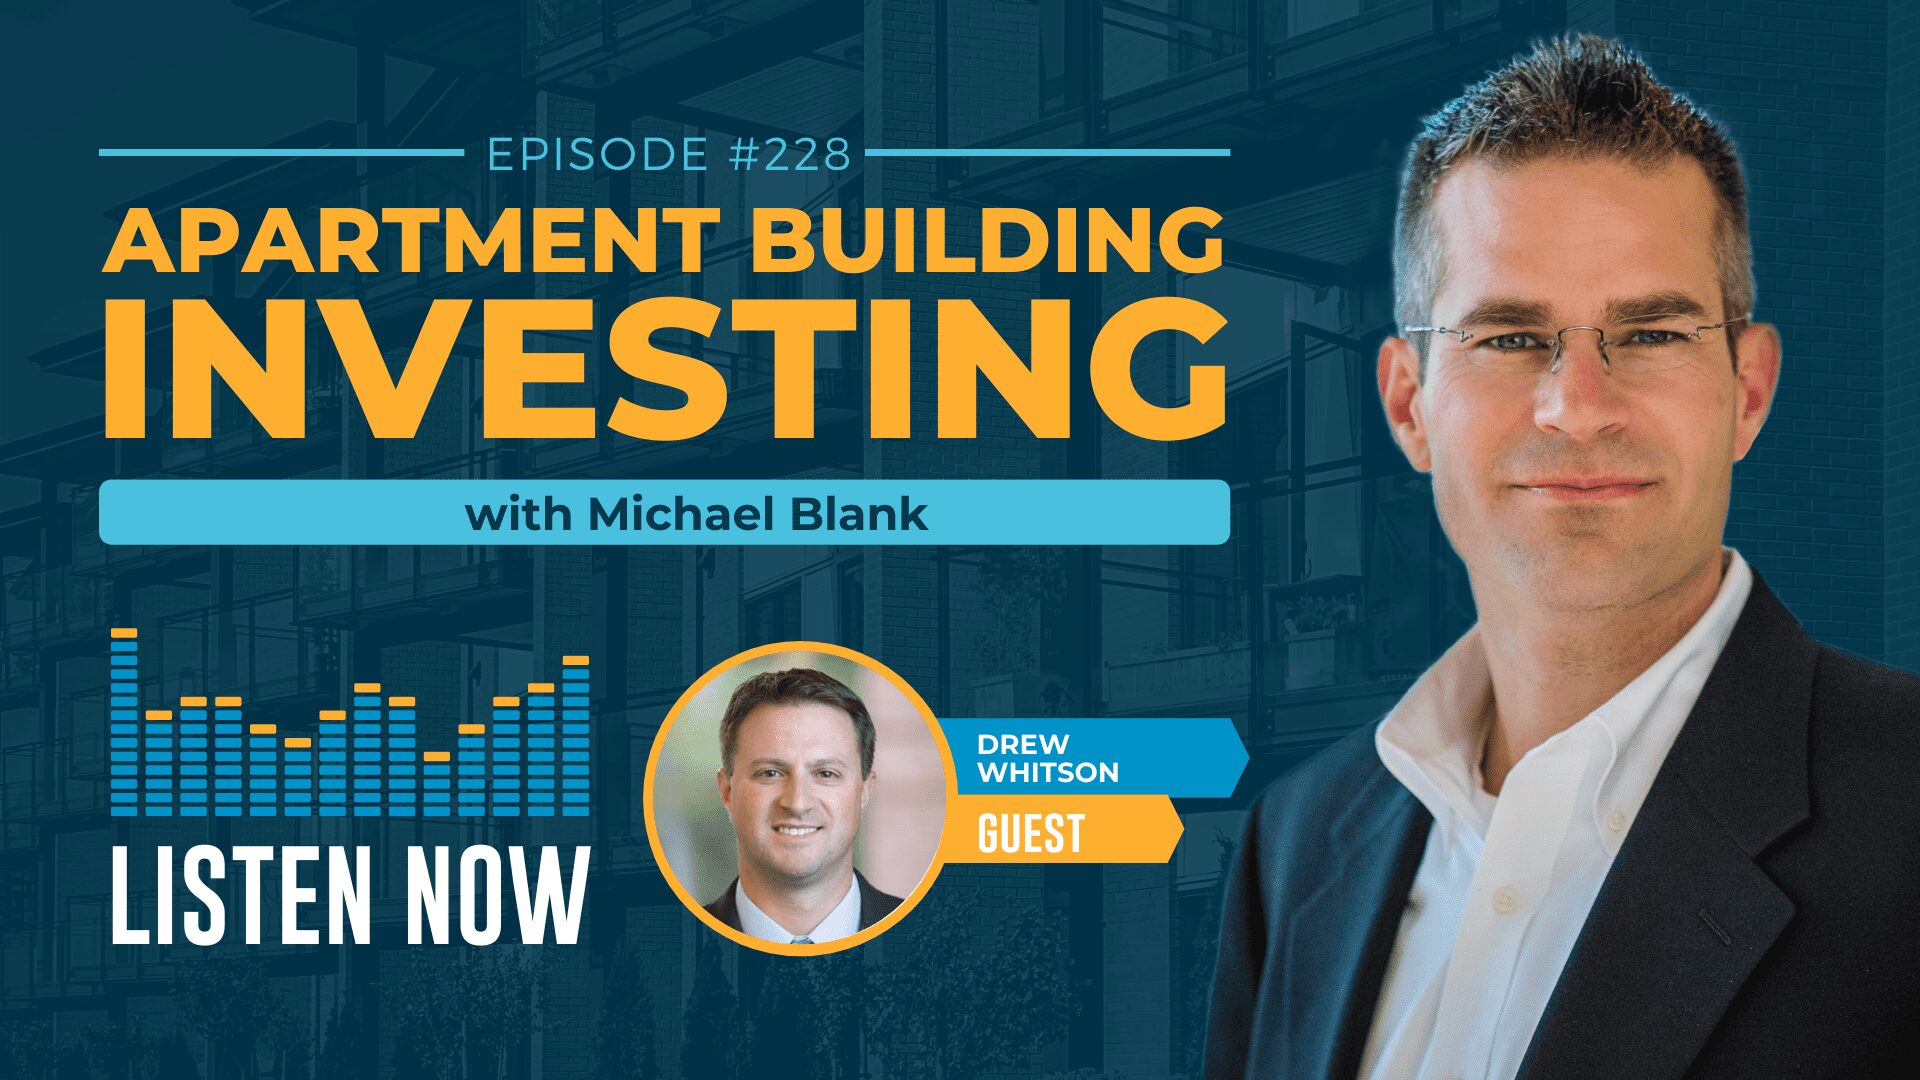 MB 228: What’s Working Now to Get Deals Done – With Drew Whitson & the Michael Blank Mentoring Team